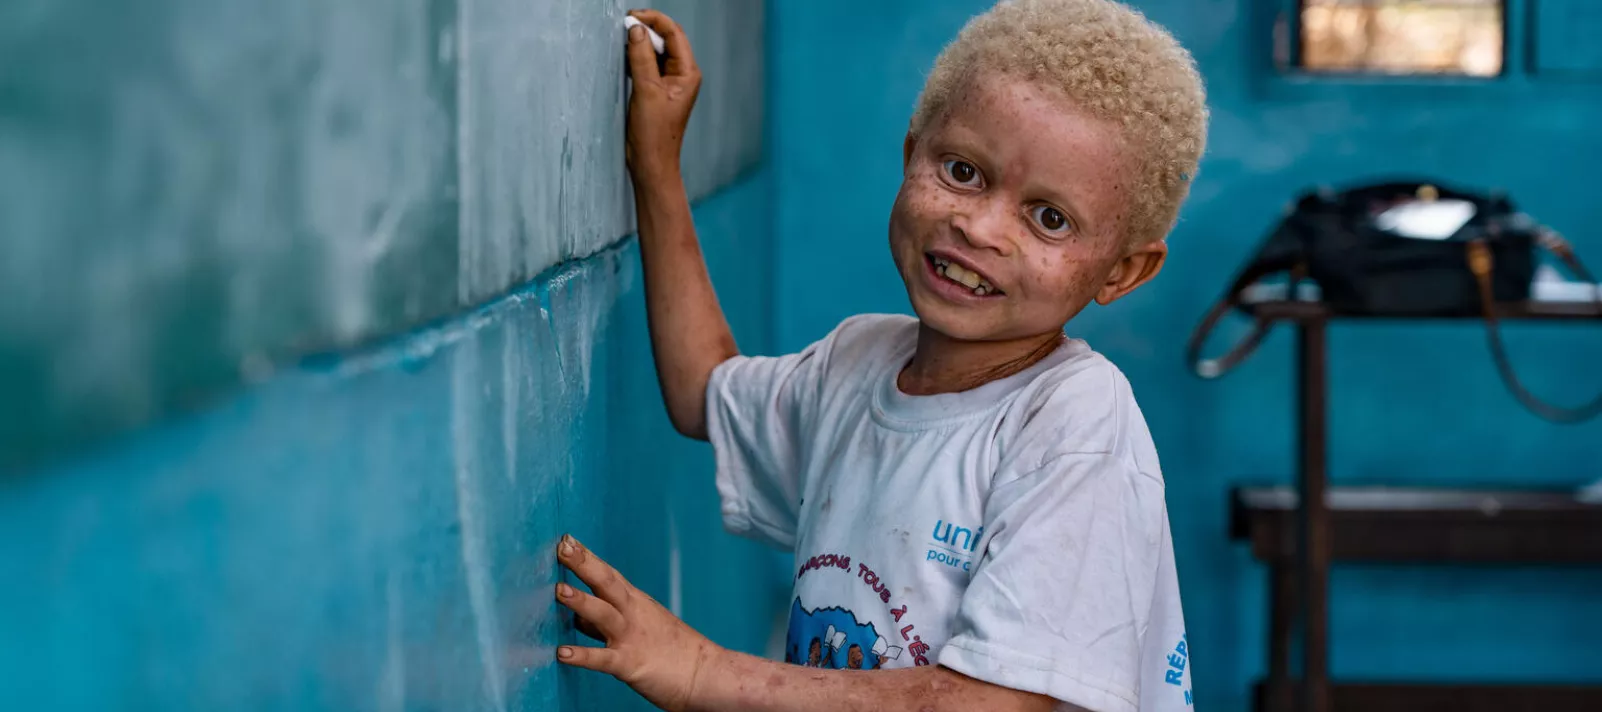 A child smiles as he writes on the blackboard in his classroom